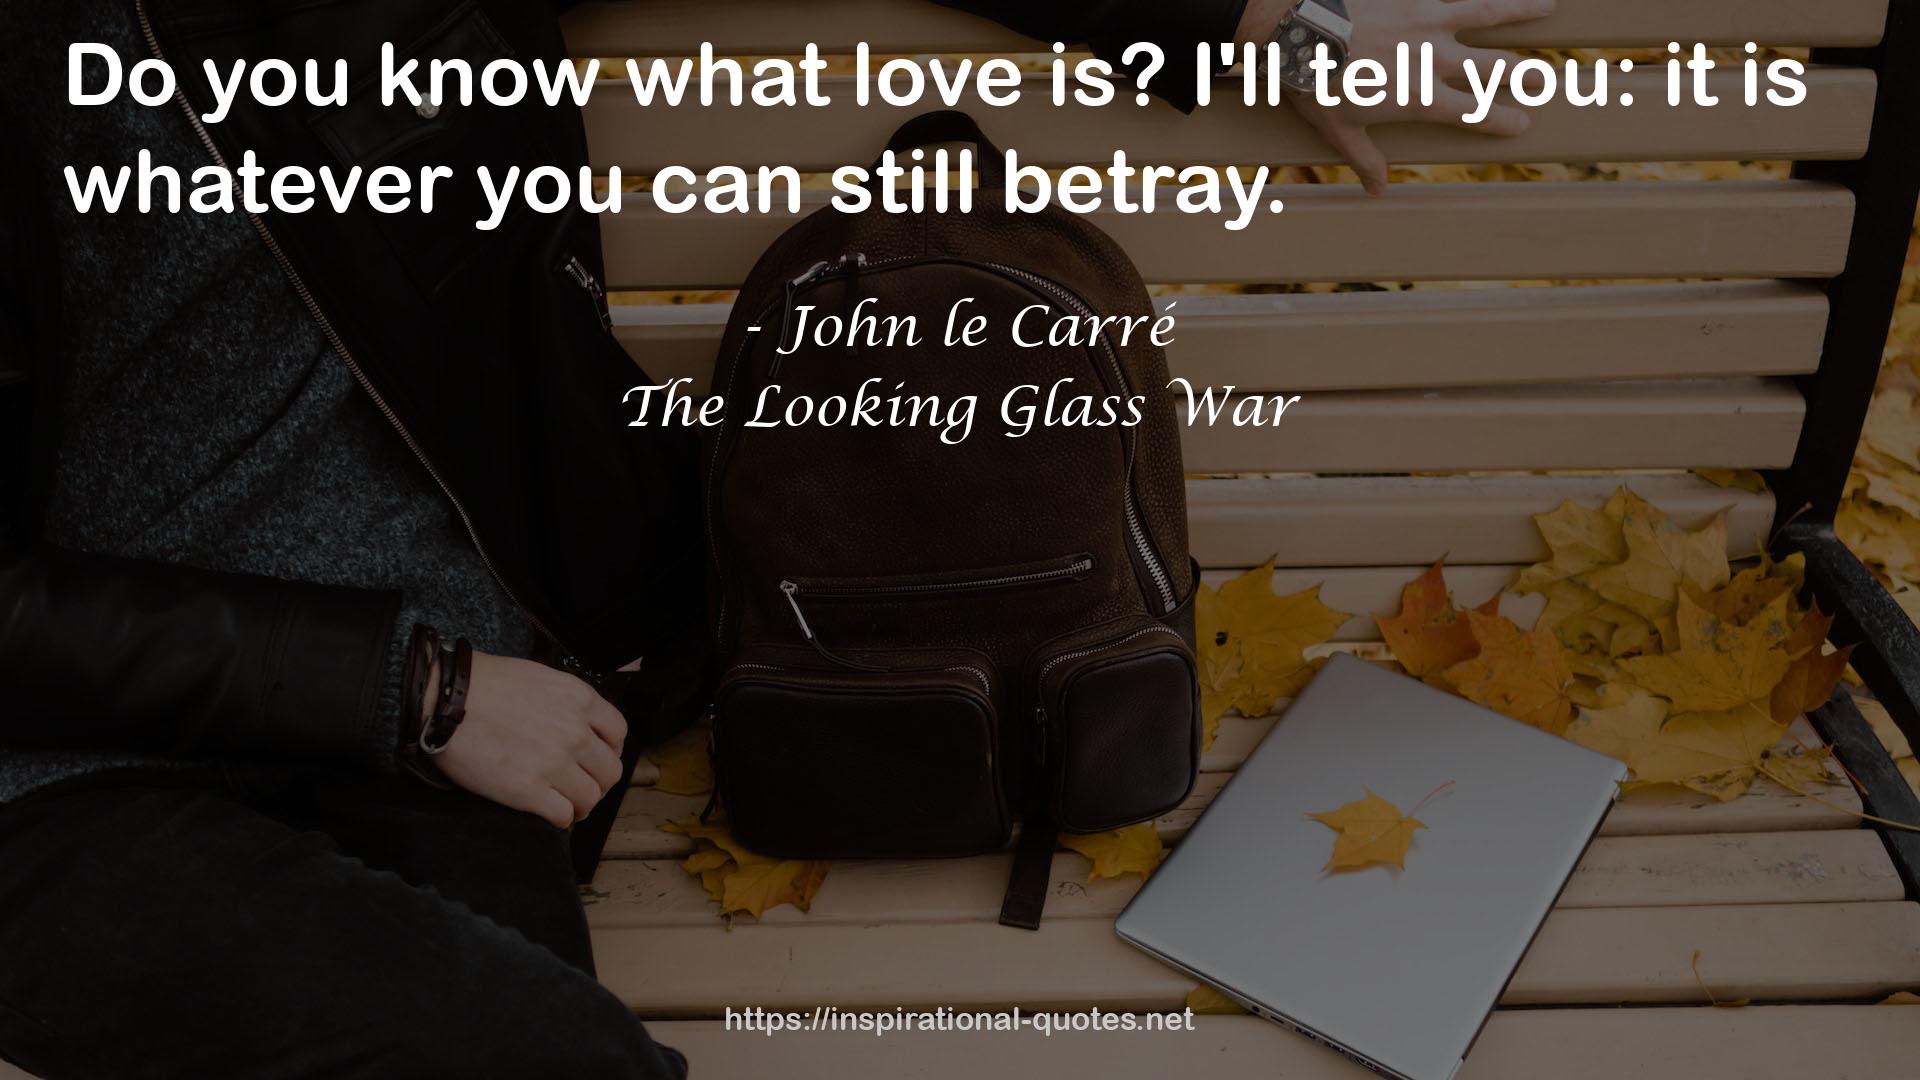 The Looking Glass War QUOTES